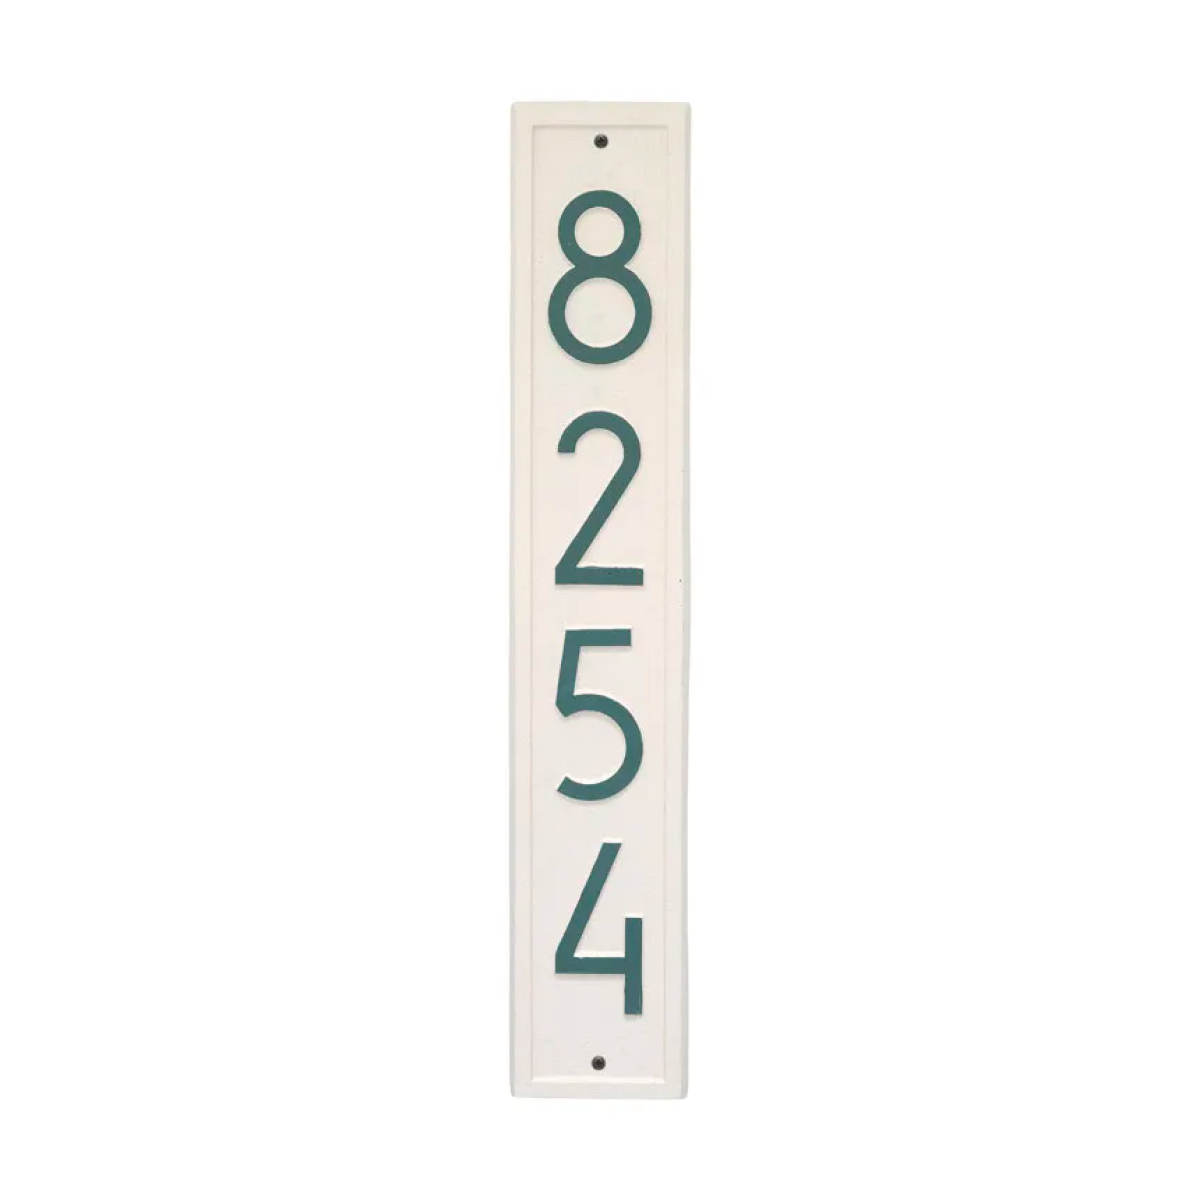 Whitehall Delaware Modern Vertical Address Plaque Product Image